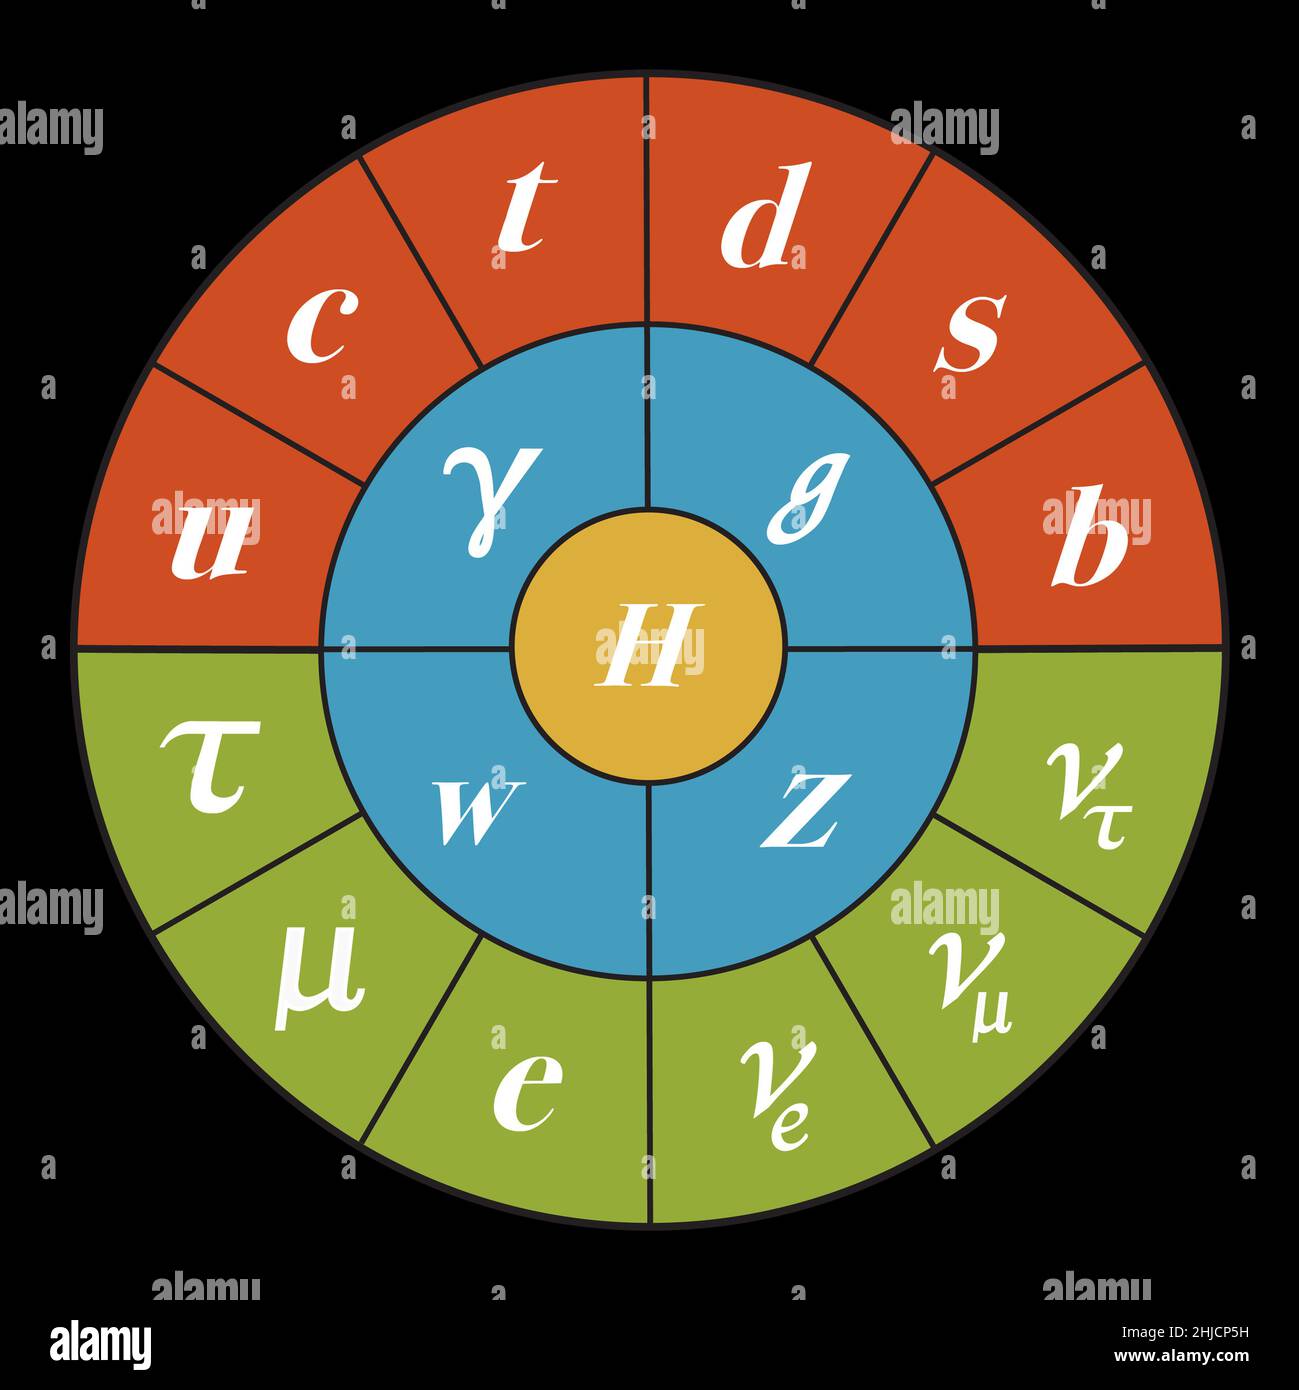 A diagram of the Standard Model to show particle physics. Particle physics standard model. The illustration shows quarks (red), leptons (green), gauge bosons (blue) and the Higgs boson (yellow). Stock Photo